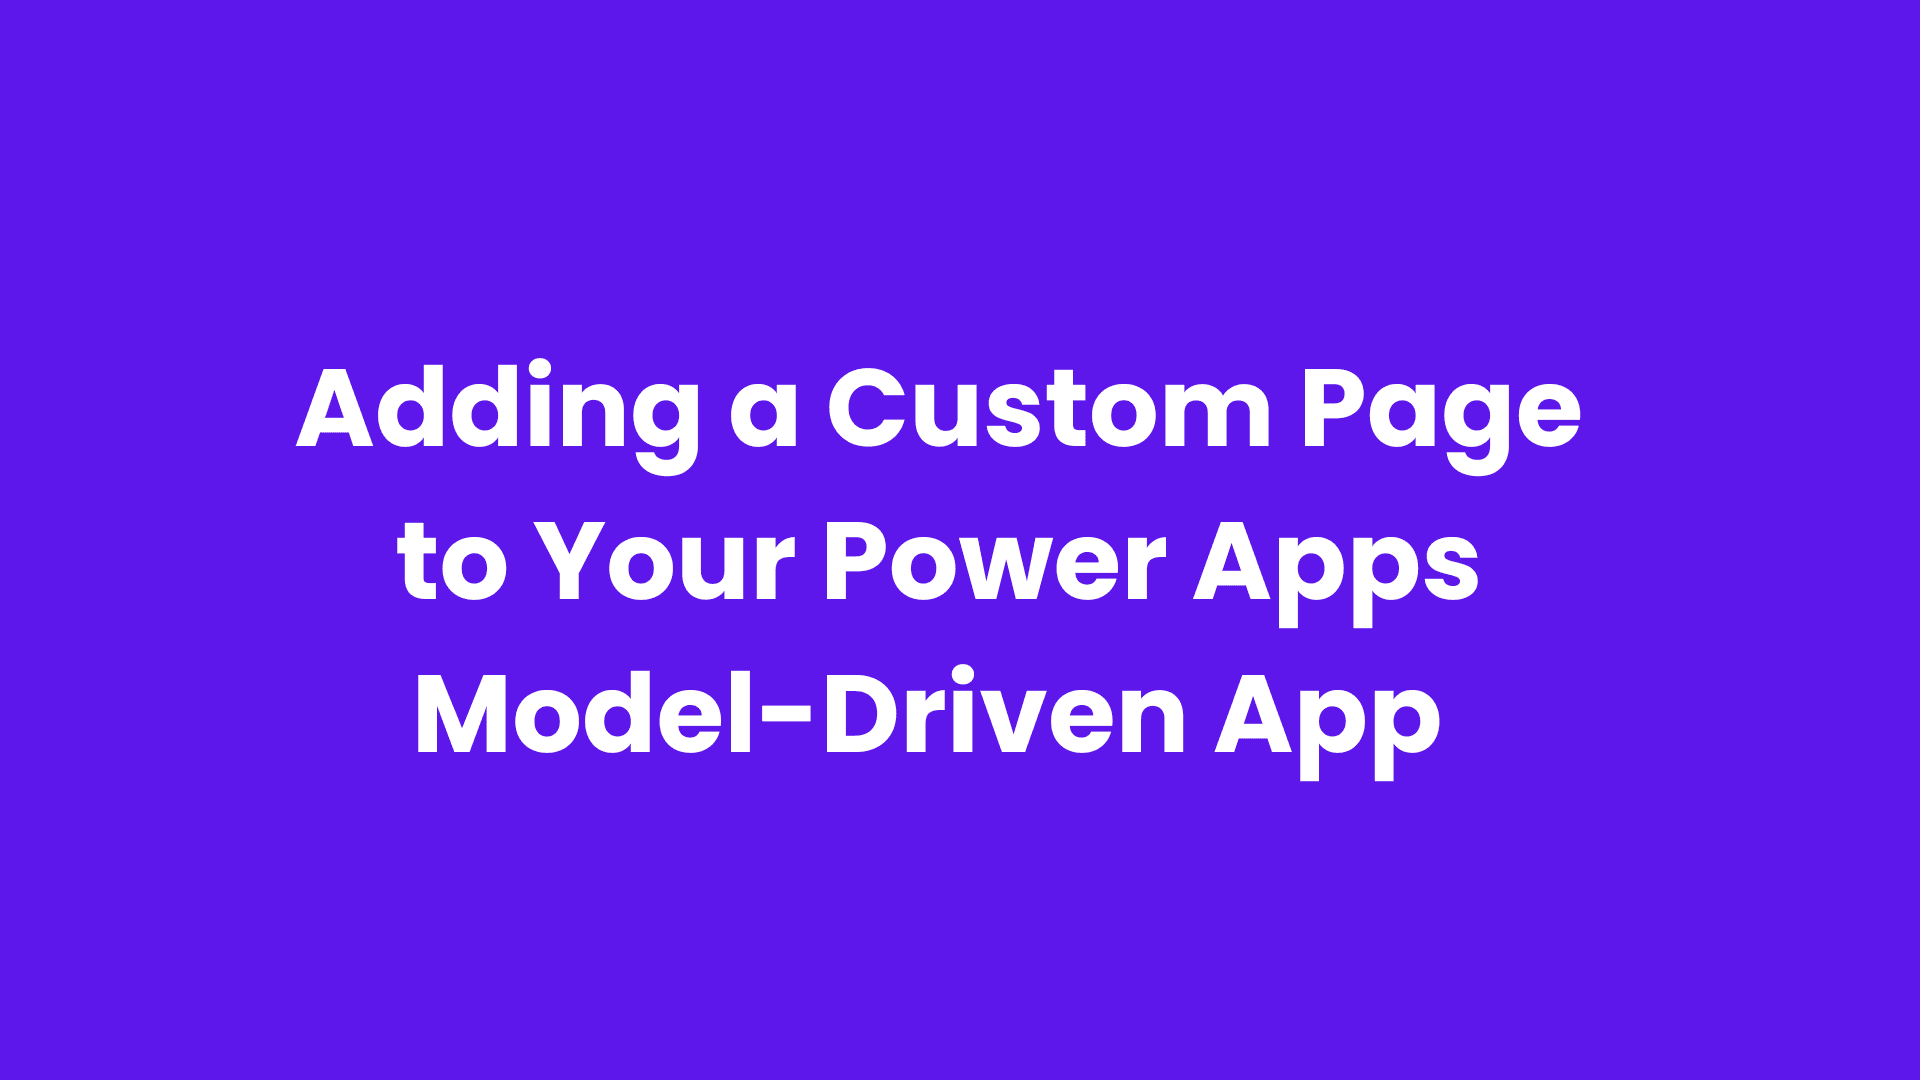 Adding a Custom Page to your Power Apps Model-Driven App 